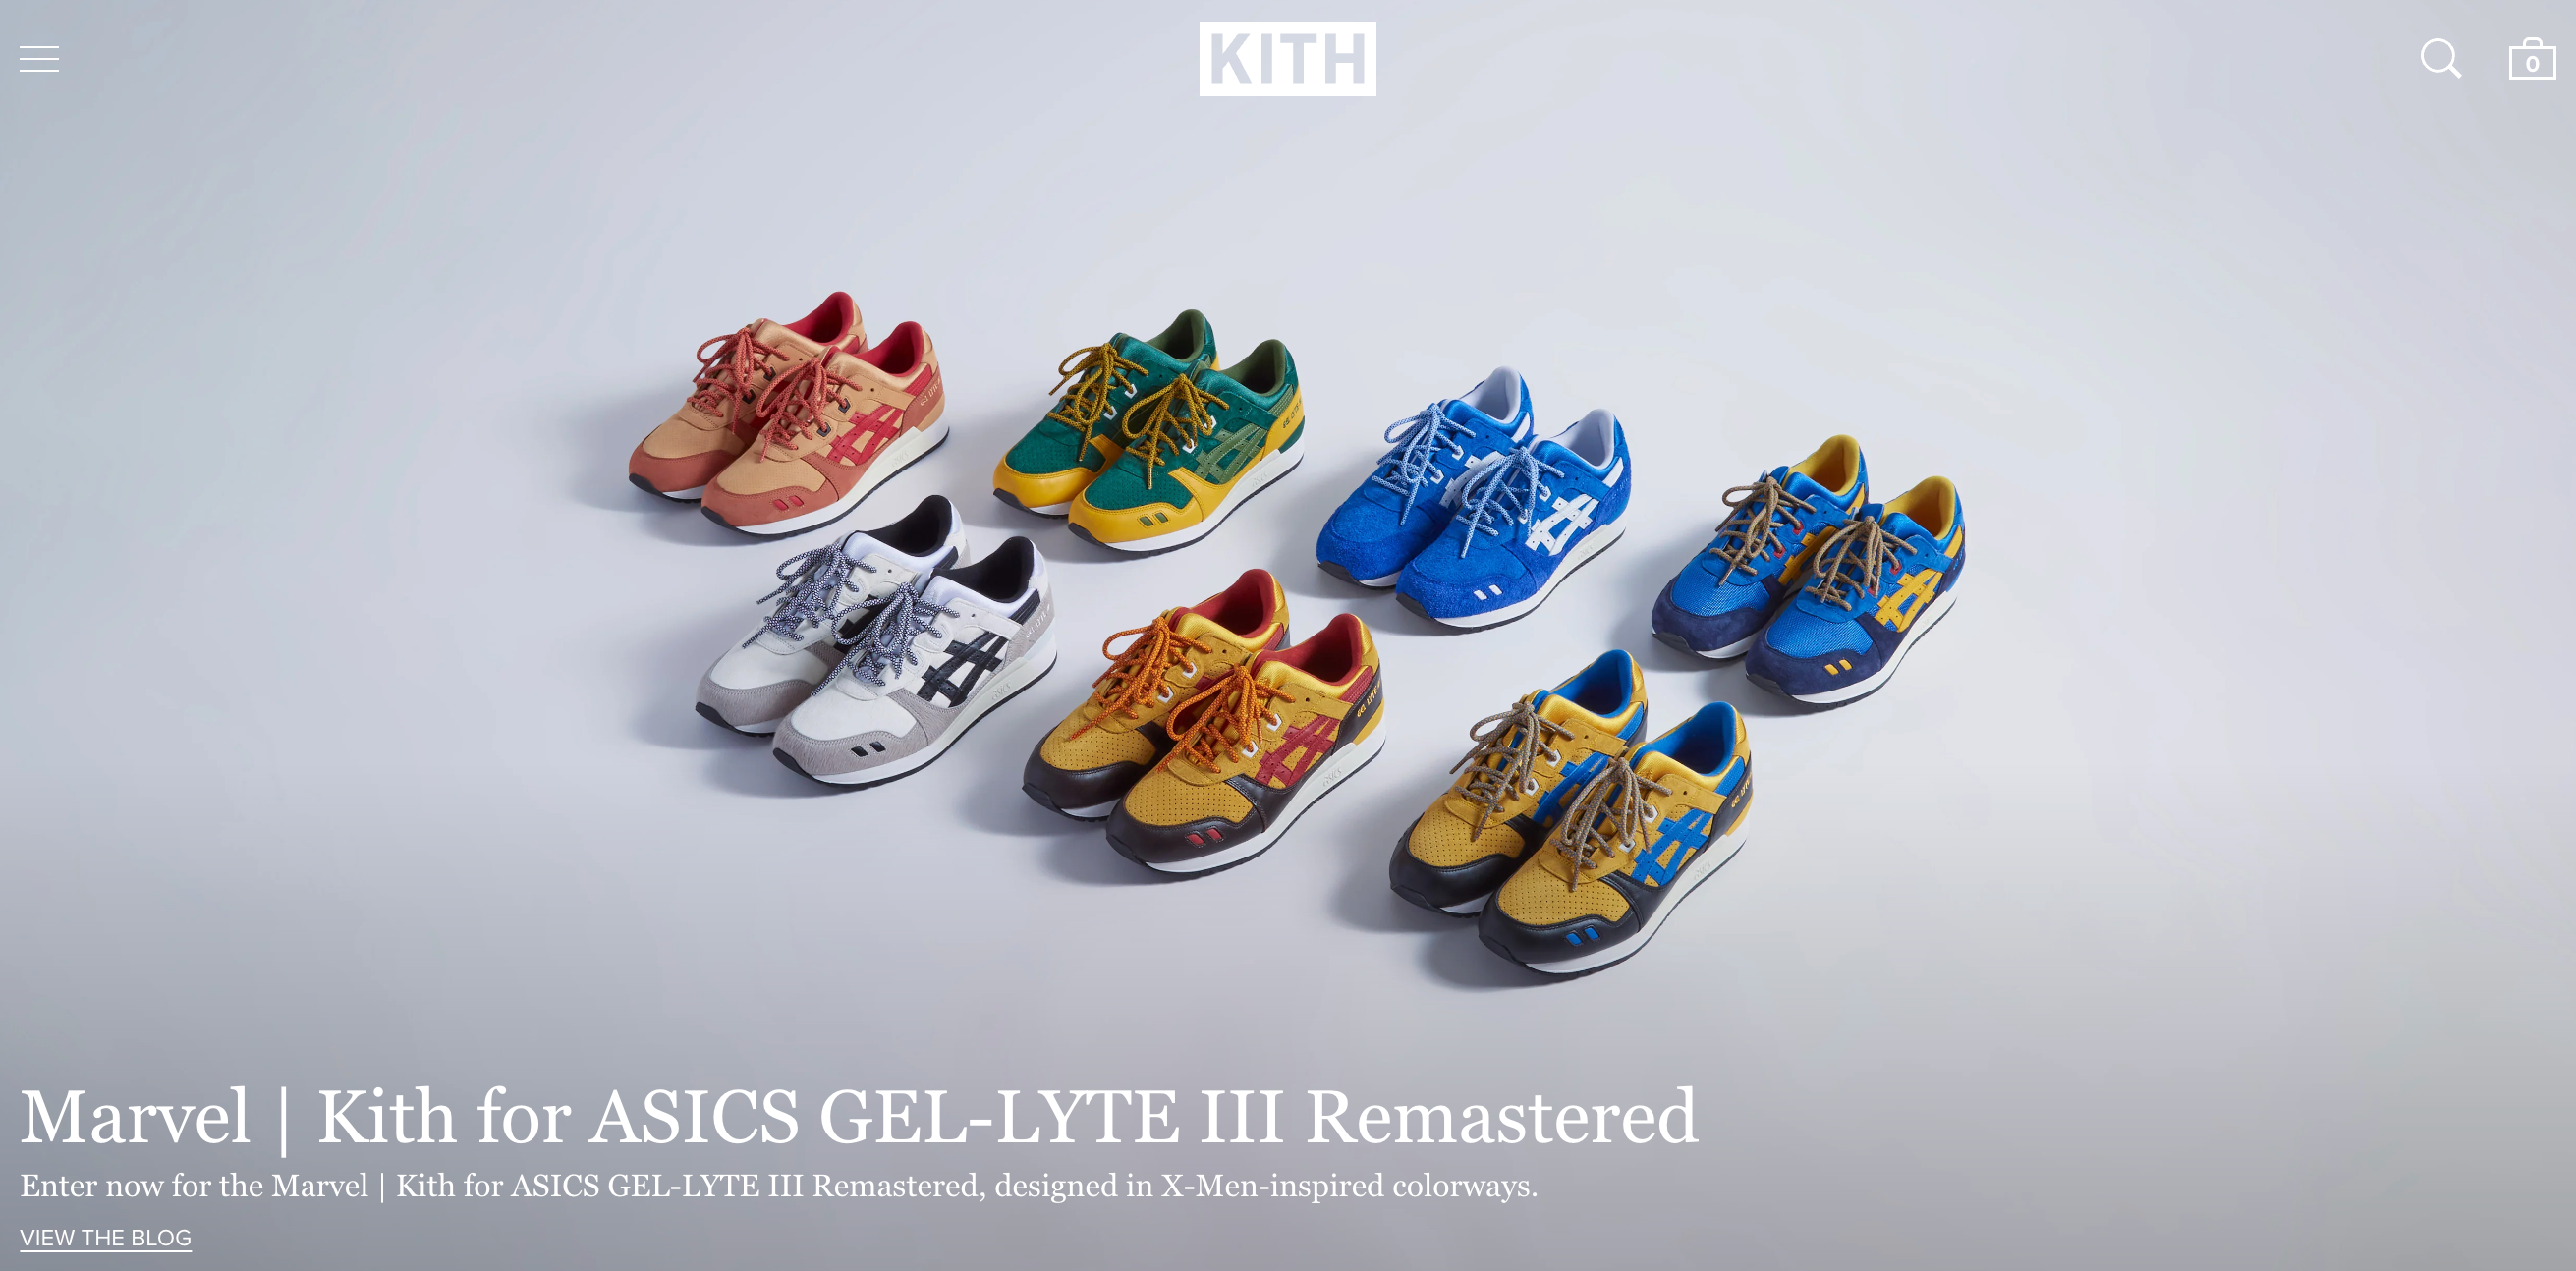 Screen grab of homepage on the KITH ecommerce website